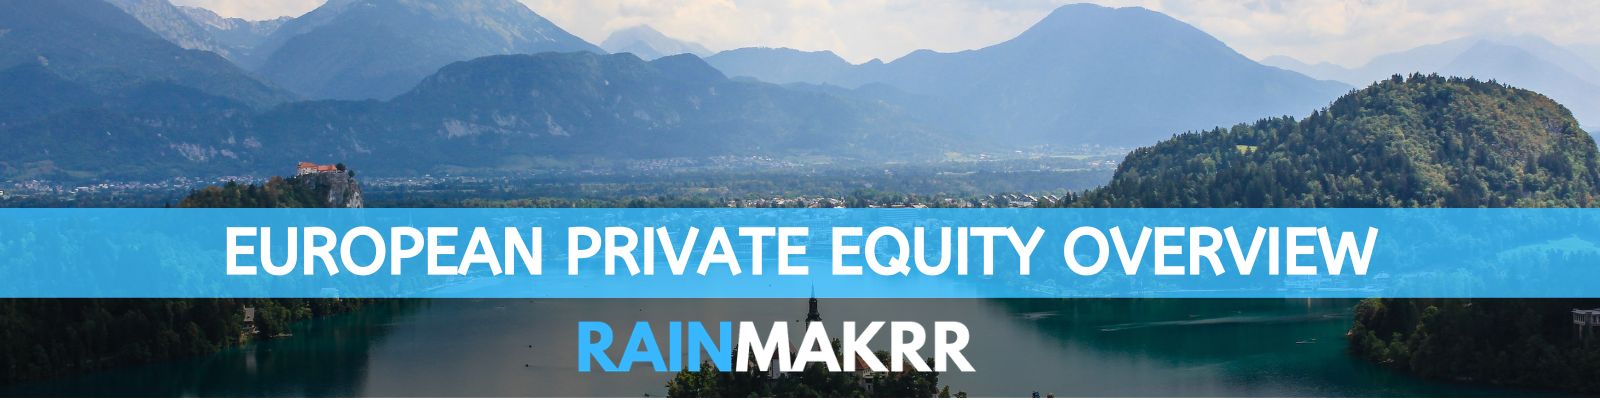 EUROPEAN PRIVATE EQUITY OVERVIEW